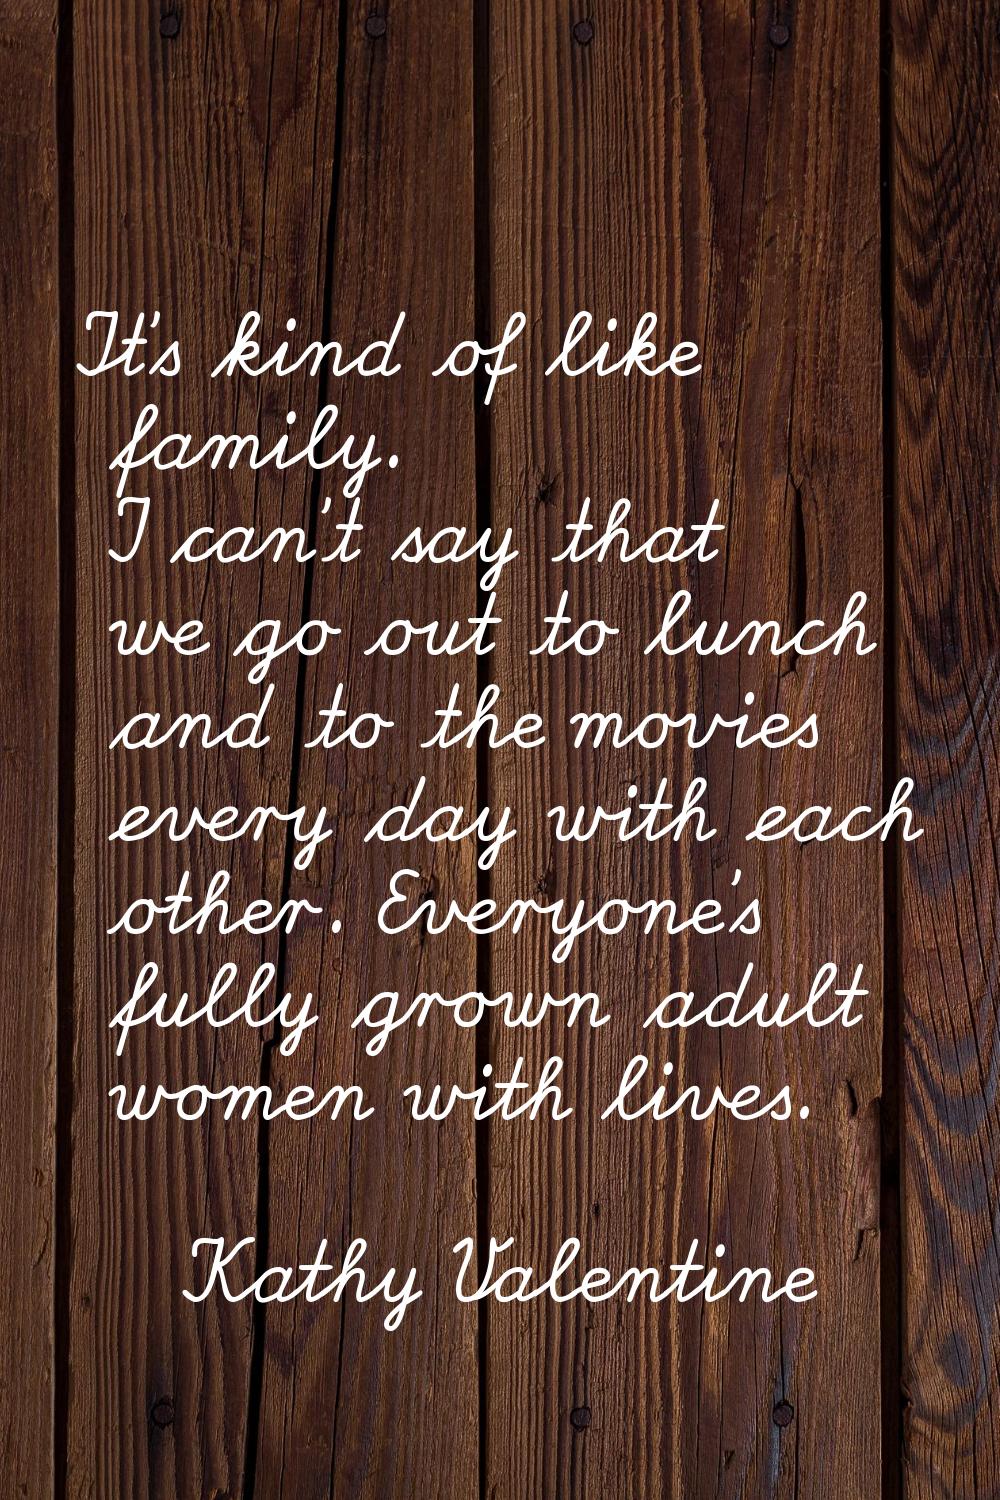 It's kind of like family. I can't say that we go out to lunch and to the movies every day with each